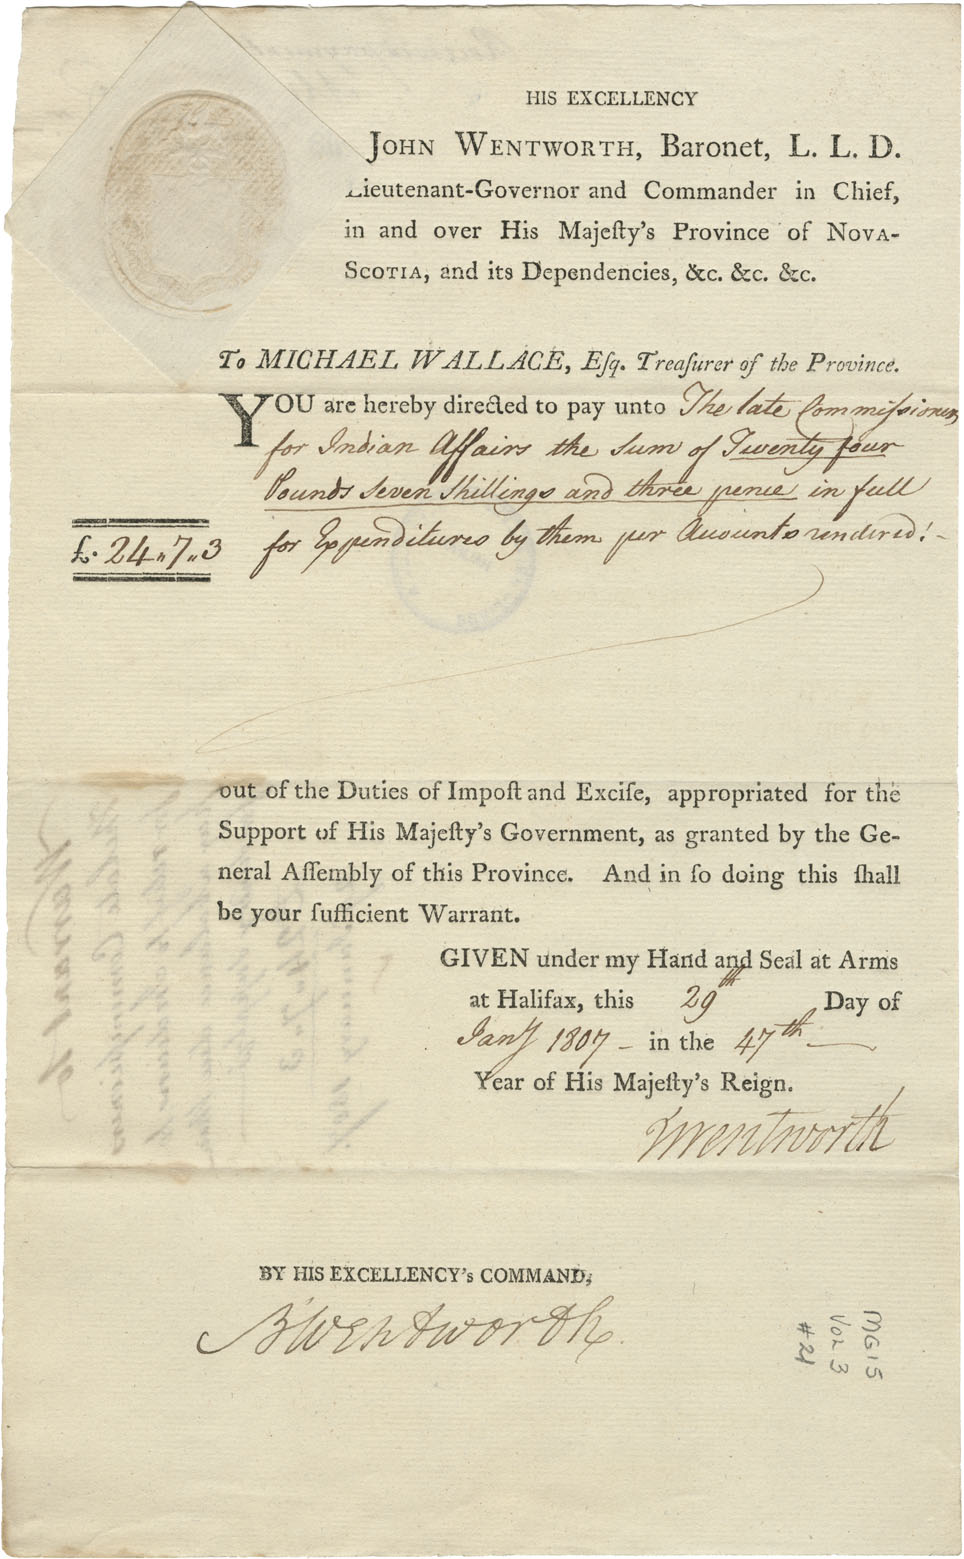 Sir John Wentworth's order to Michael Wallace, Treasurer, to pay £24-7-3 to late Commissioners for Indian Affairs.